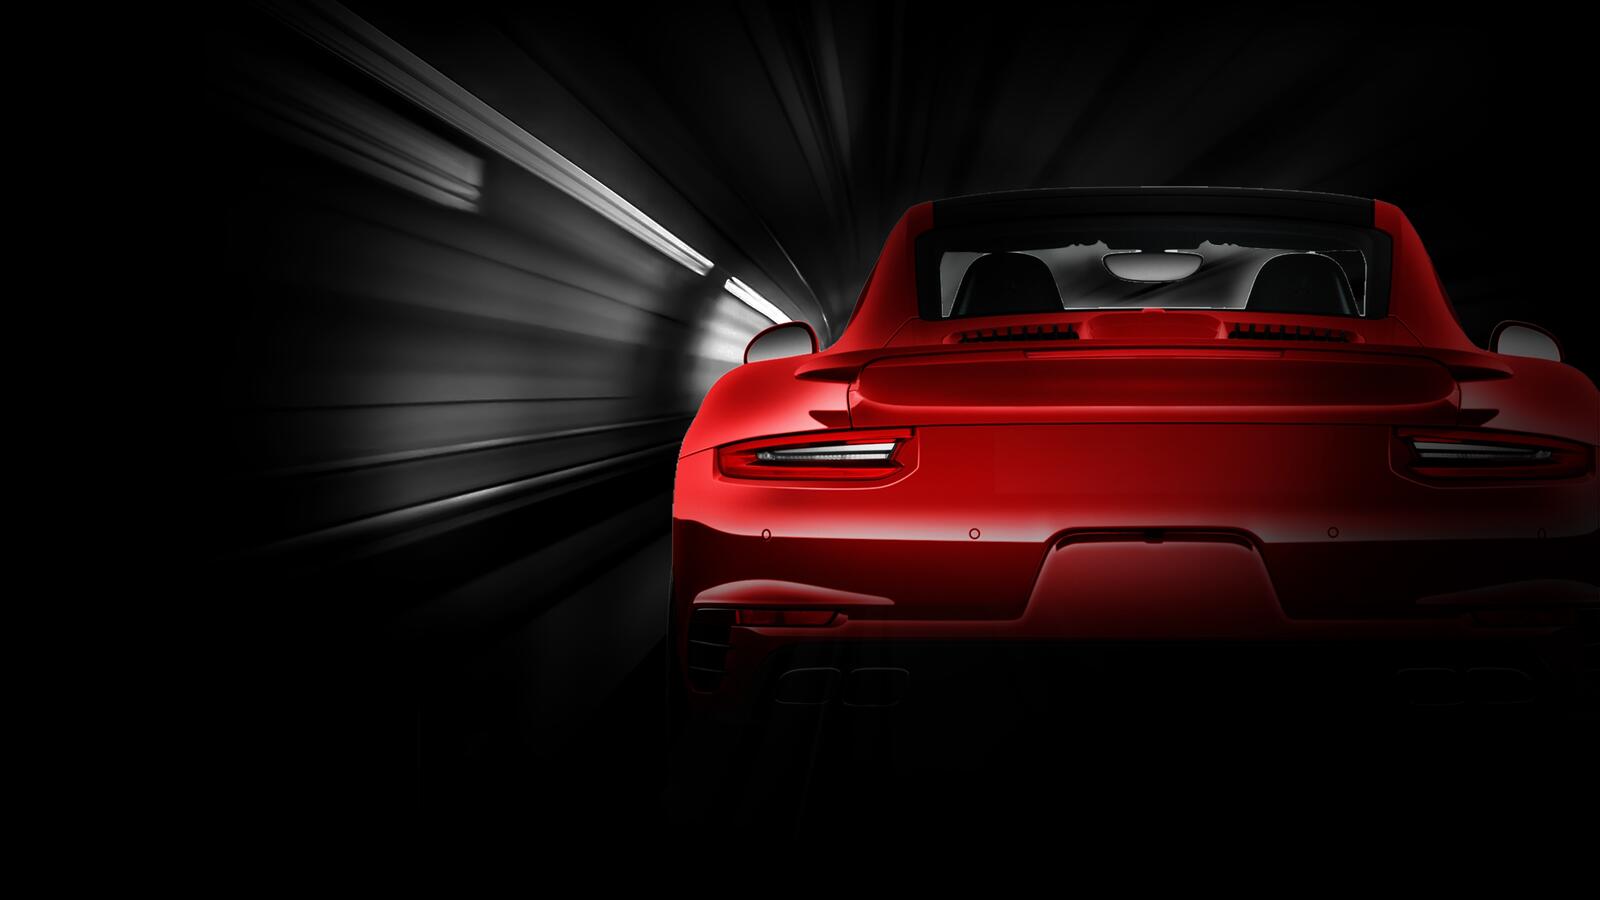 Wallpapers Porsche red supercars on the desktop